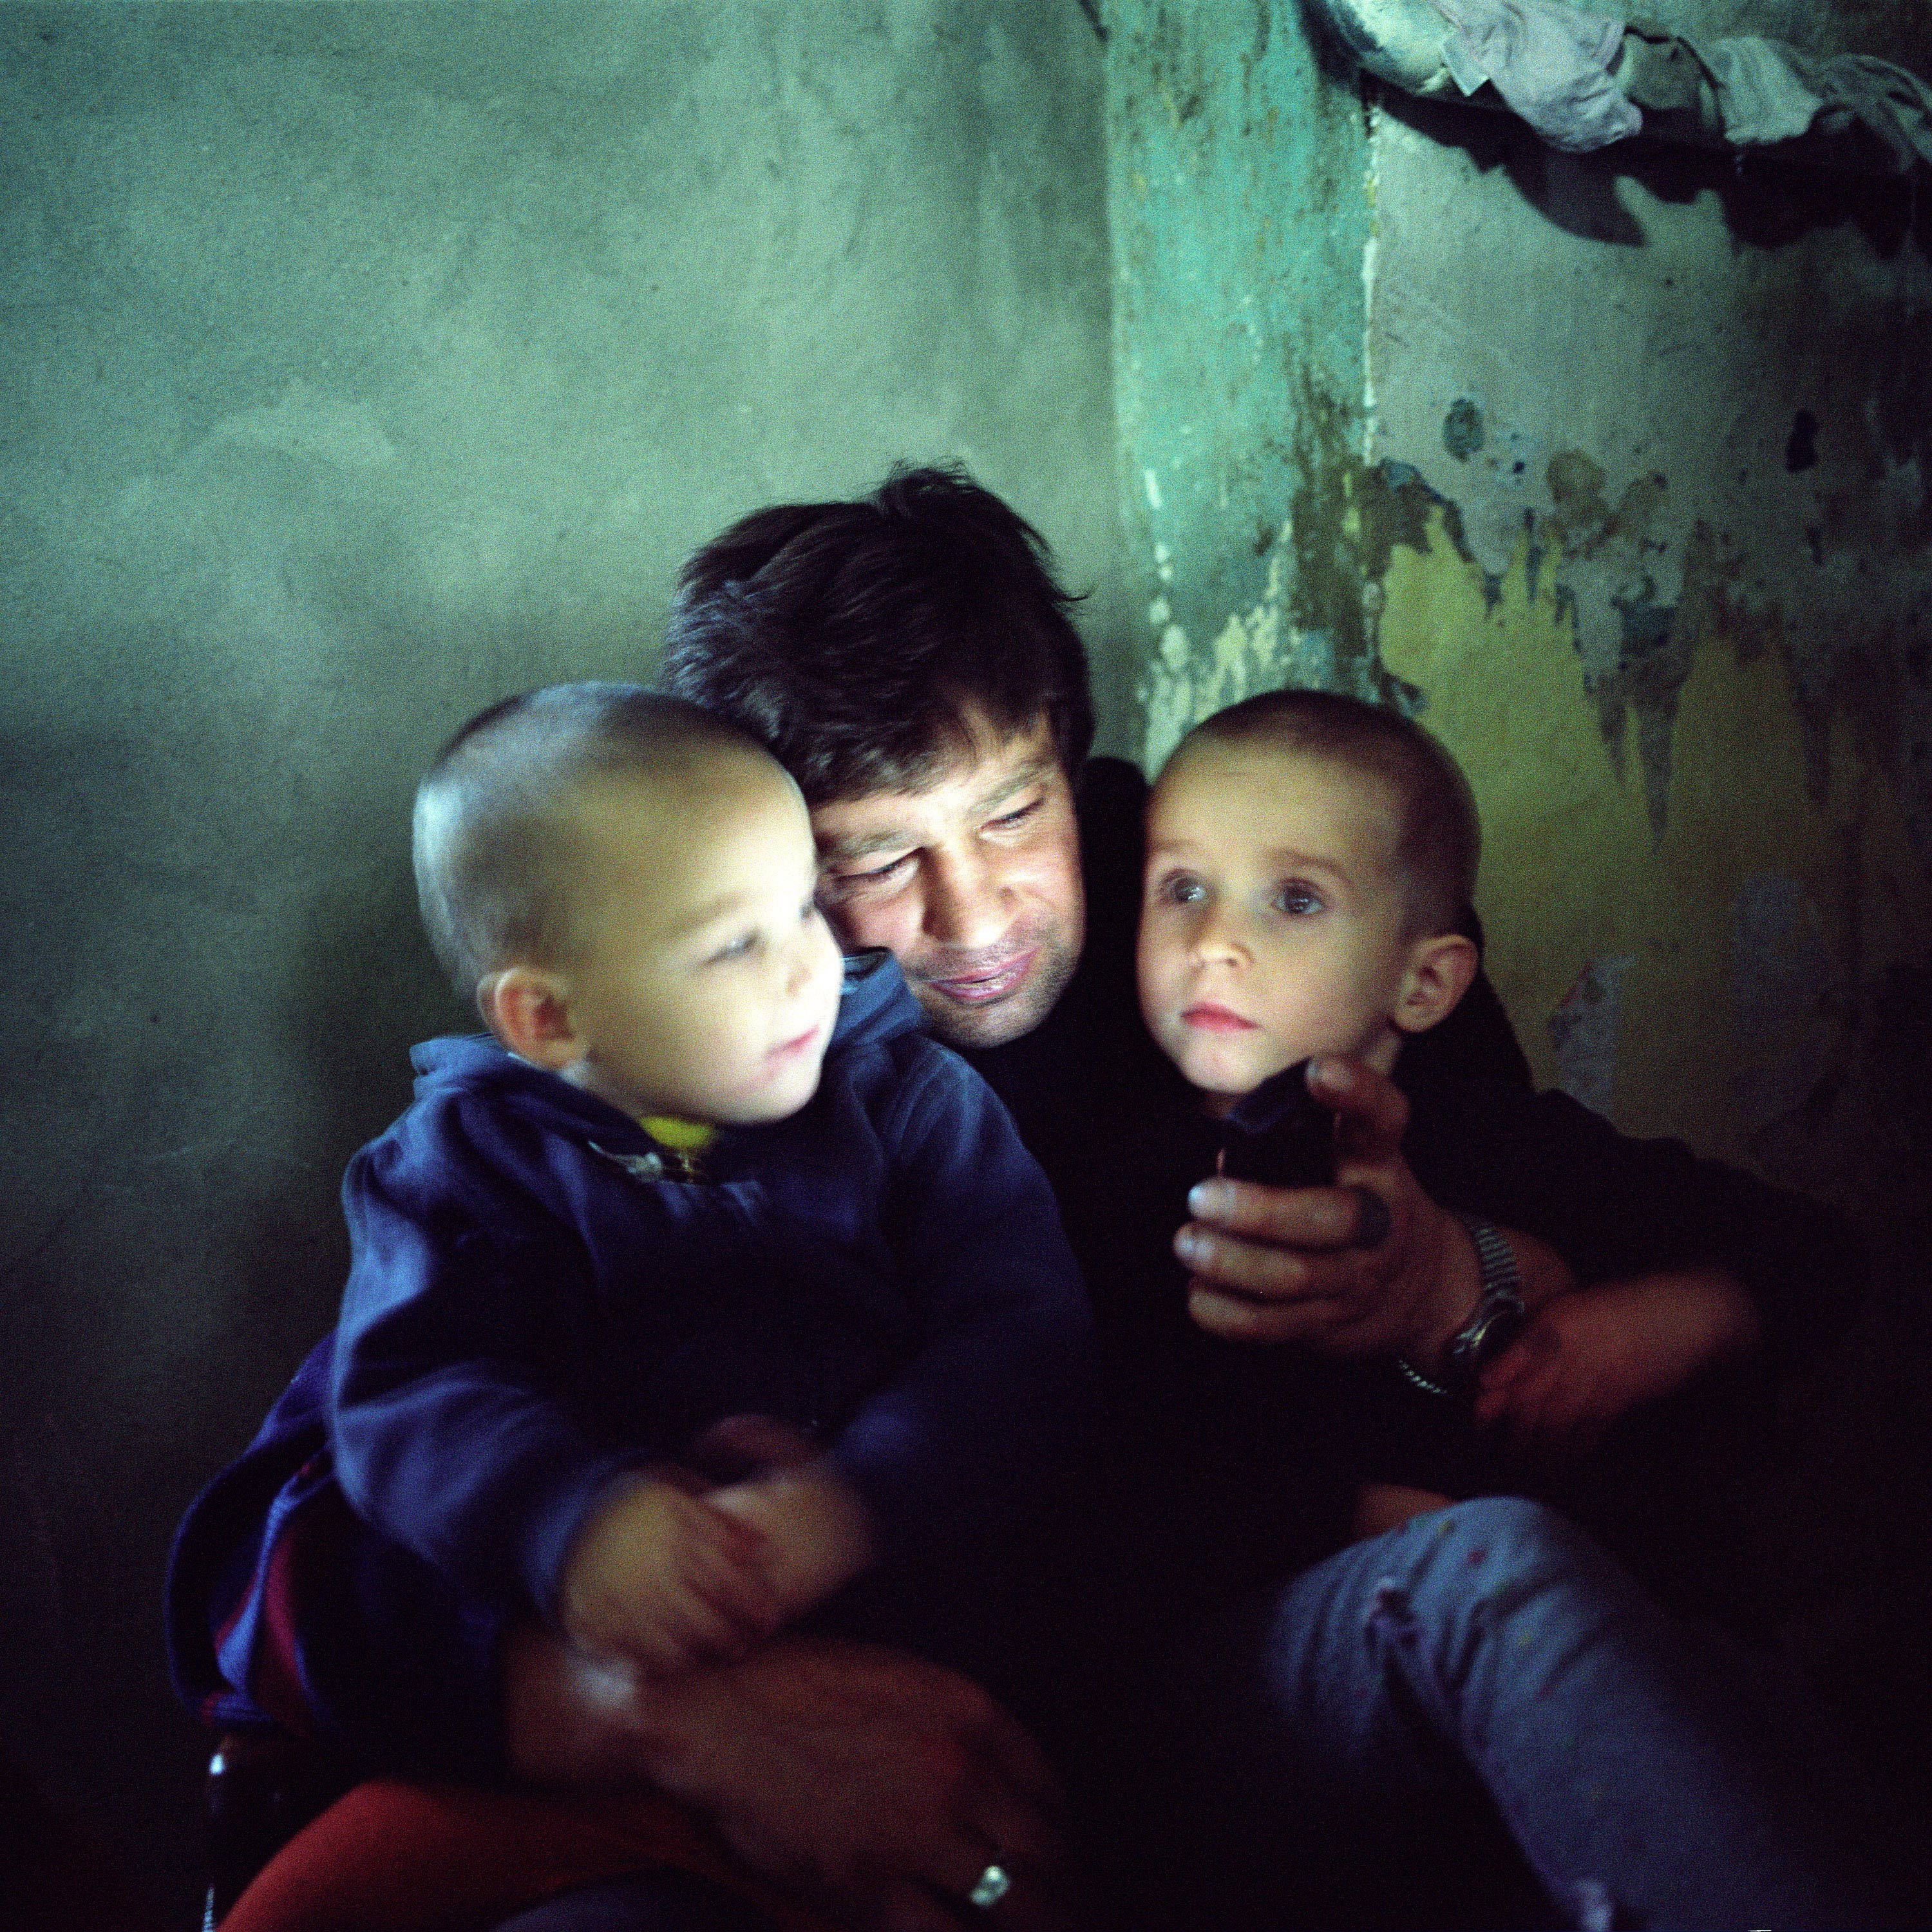 Sasha, who is HIV-positive, watches a video on his mobile phone with his child and grandson. Odesa, Ukraine, 2008. ©Joseph Sywenkyj